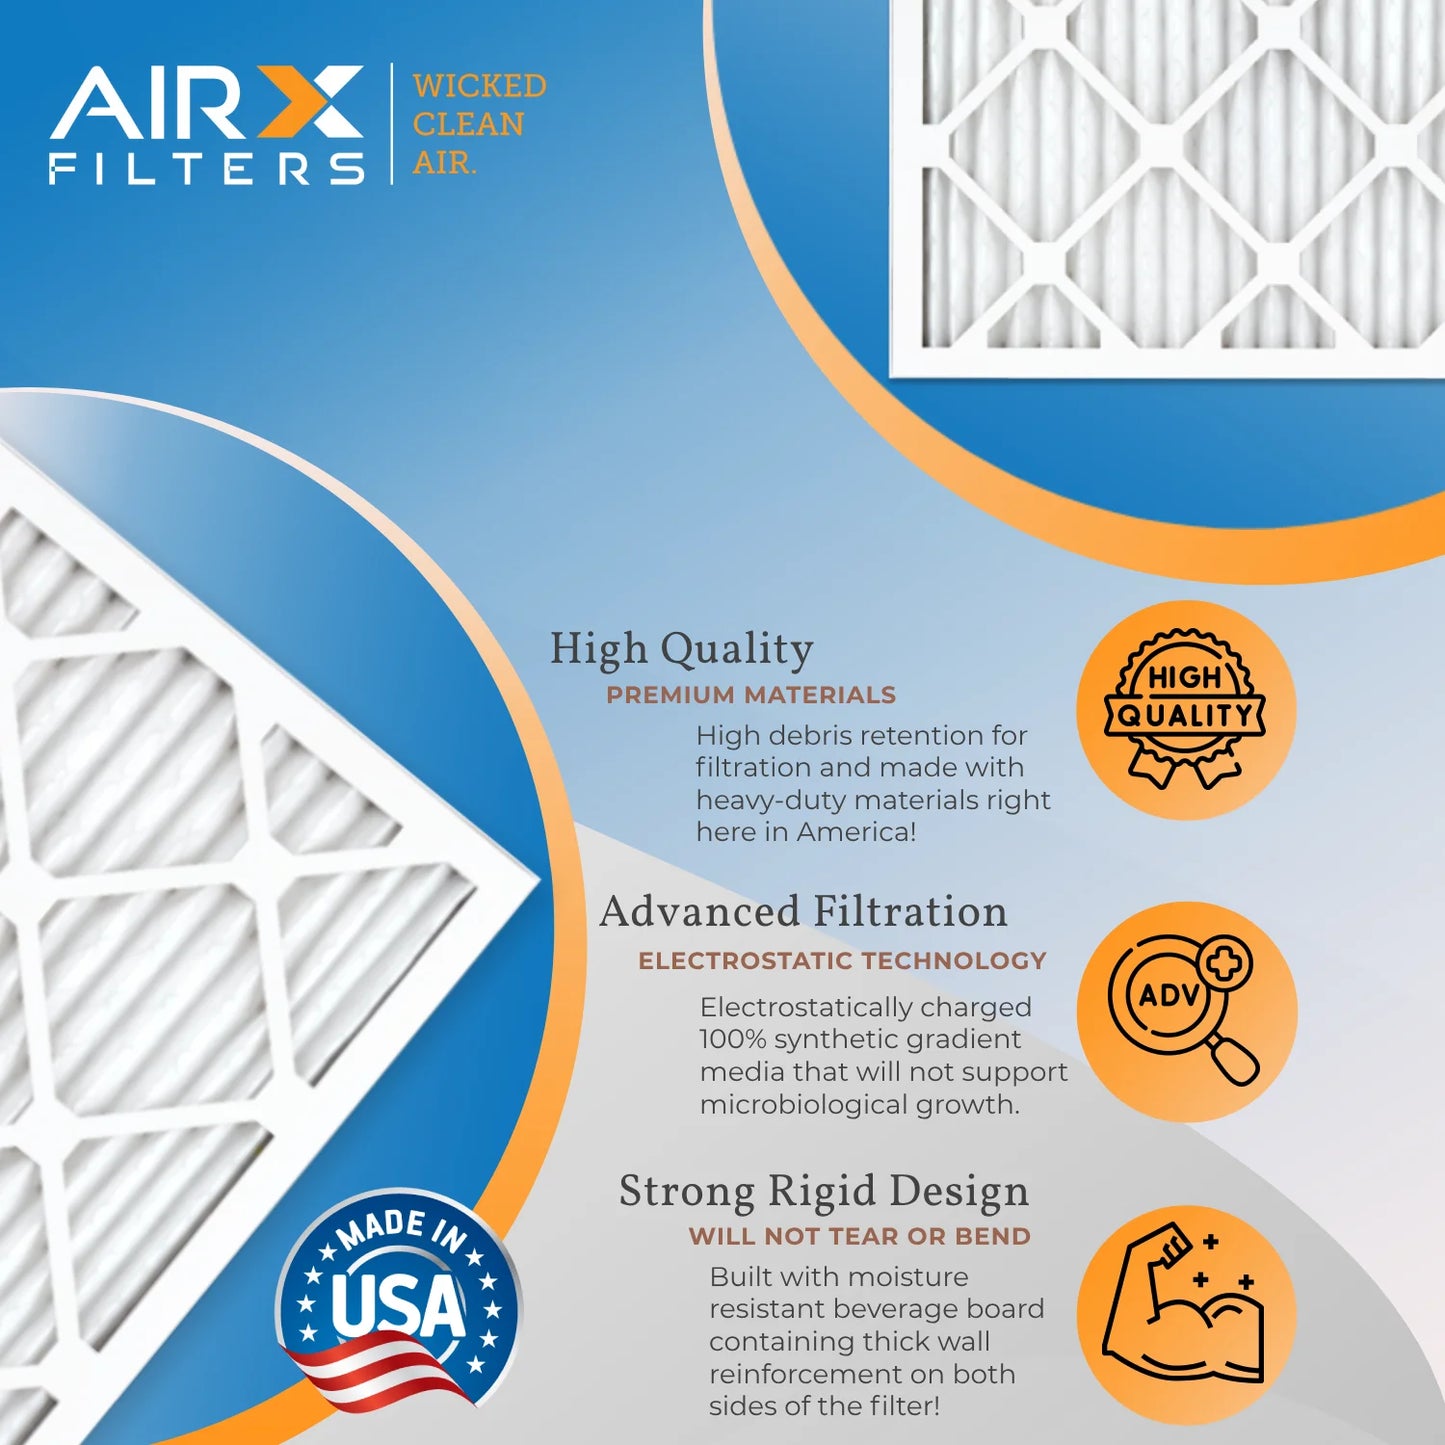 12x24x2 Air Filter MERV 11 Comparable to MPR 1000, MPR 1200 & FPR 7 Electrostatic Pleated Air Conditioner Filter 6 Pack HVAC Premium USA Made 12x24x2 Furnace Filters by AIRX FILTERS WICKED CLEAN AIR.